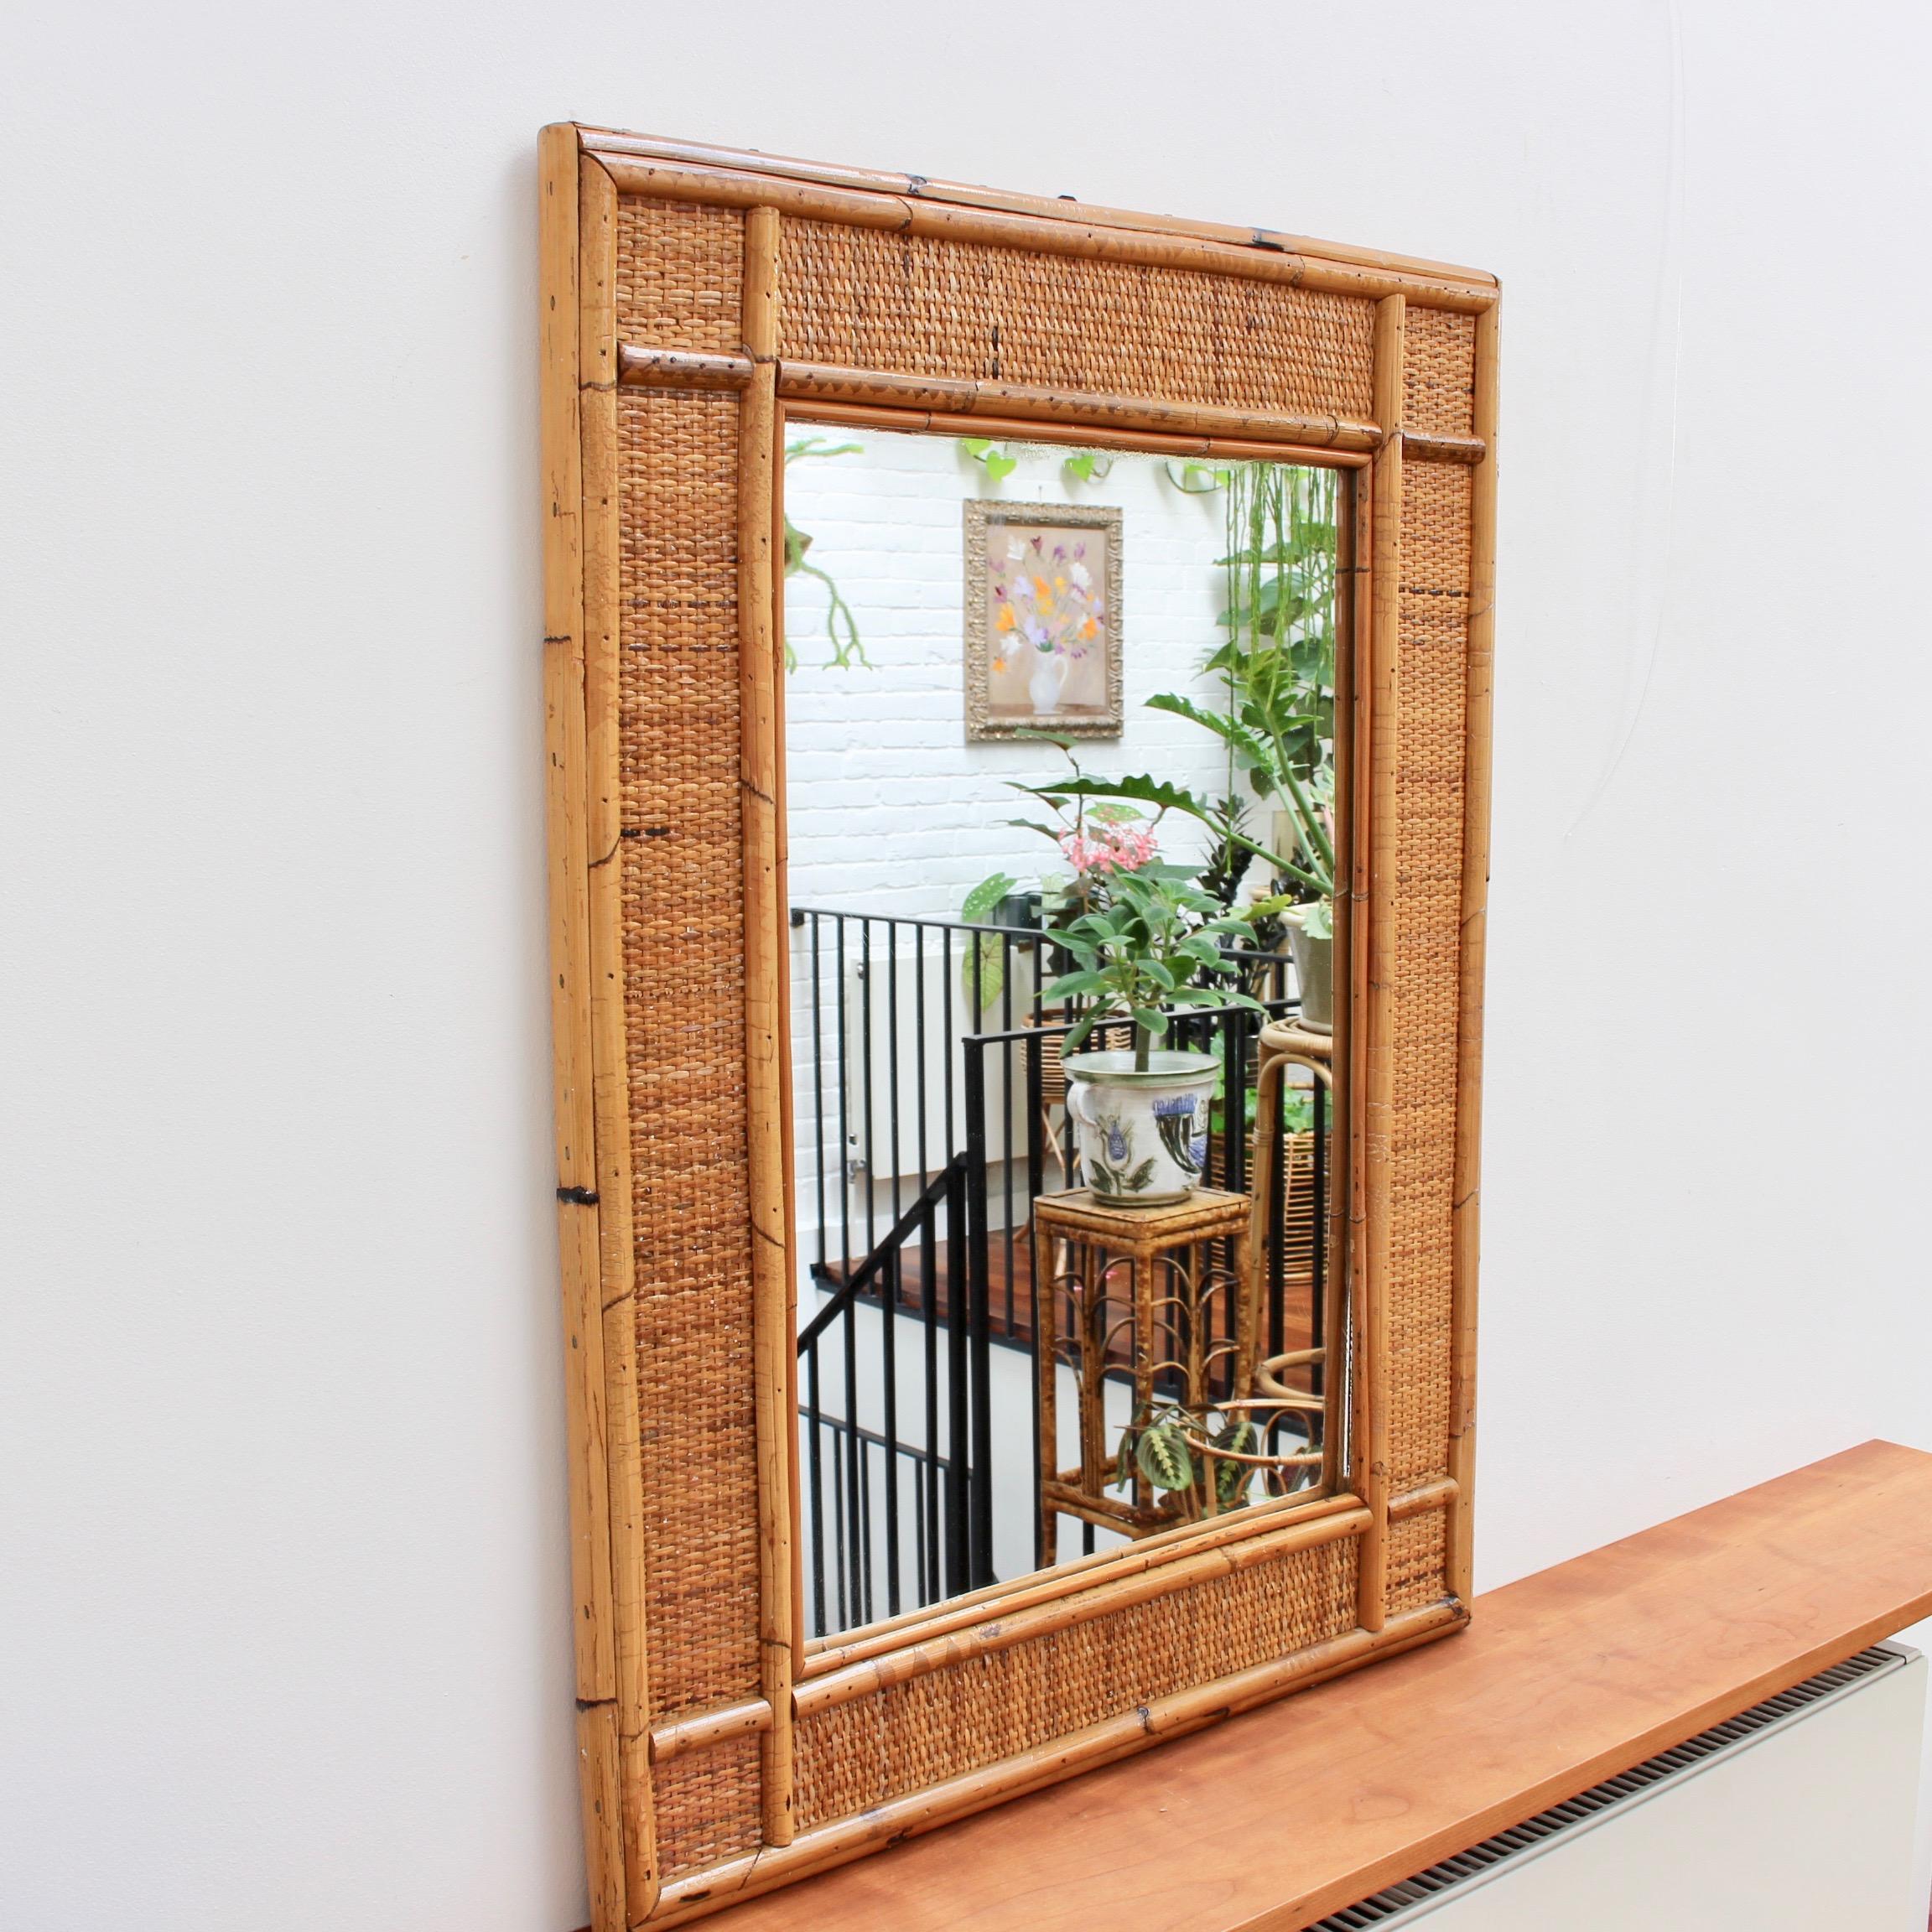 Midcentury Italian wicker and rattan wall mirror (circa 1960s). This mirror has a delightful rectangular shape with glass enclosed by the caned frame which is itself, framed by wicker and more cane. The wicker In between the two frames is a